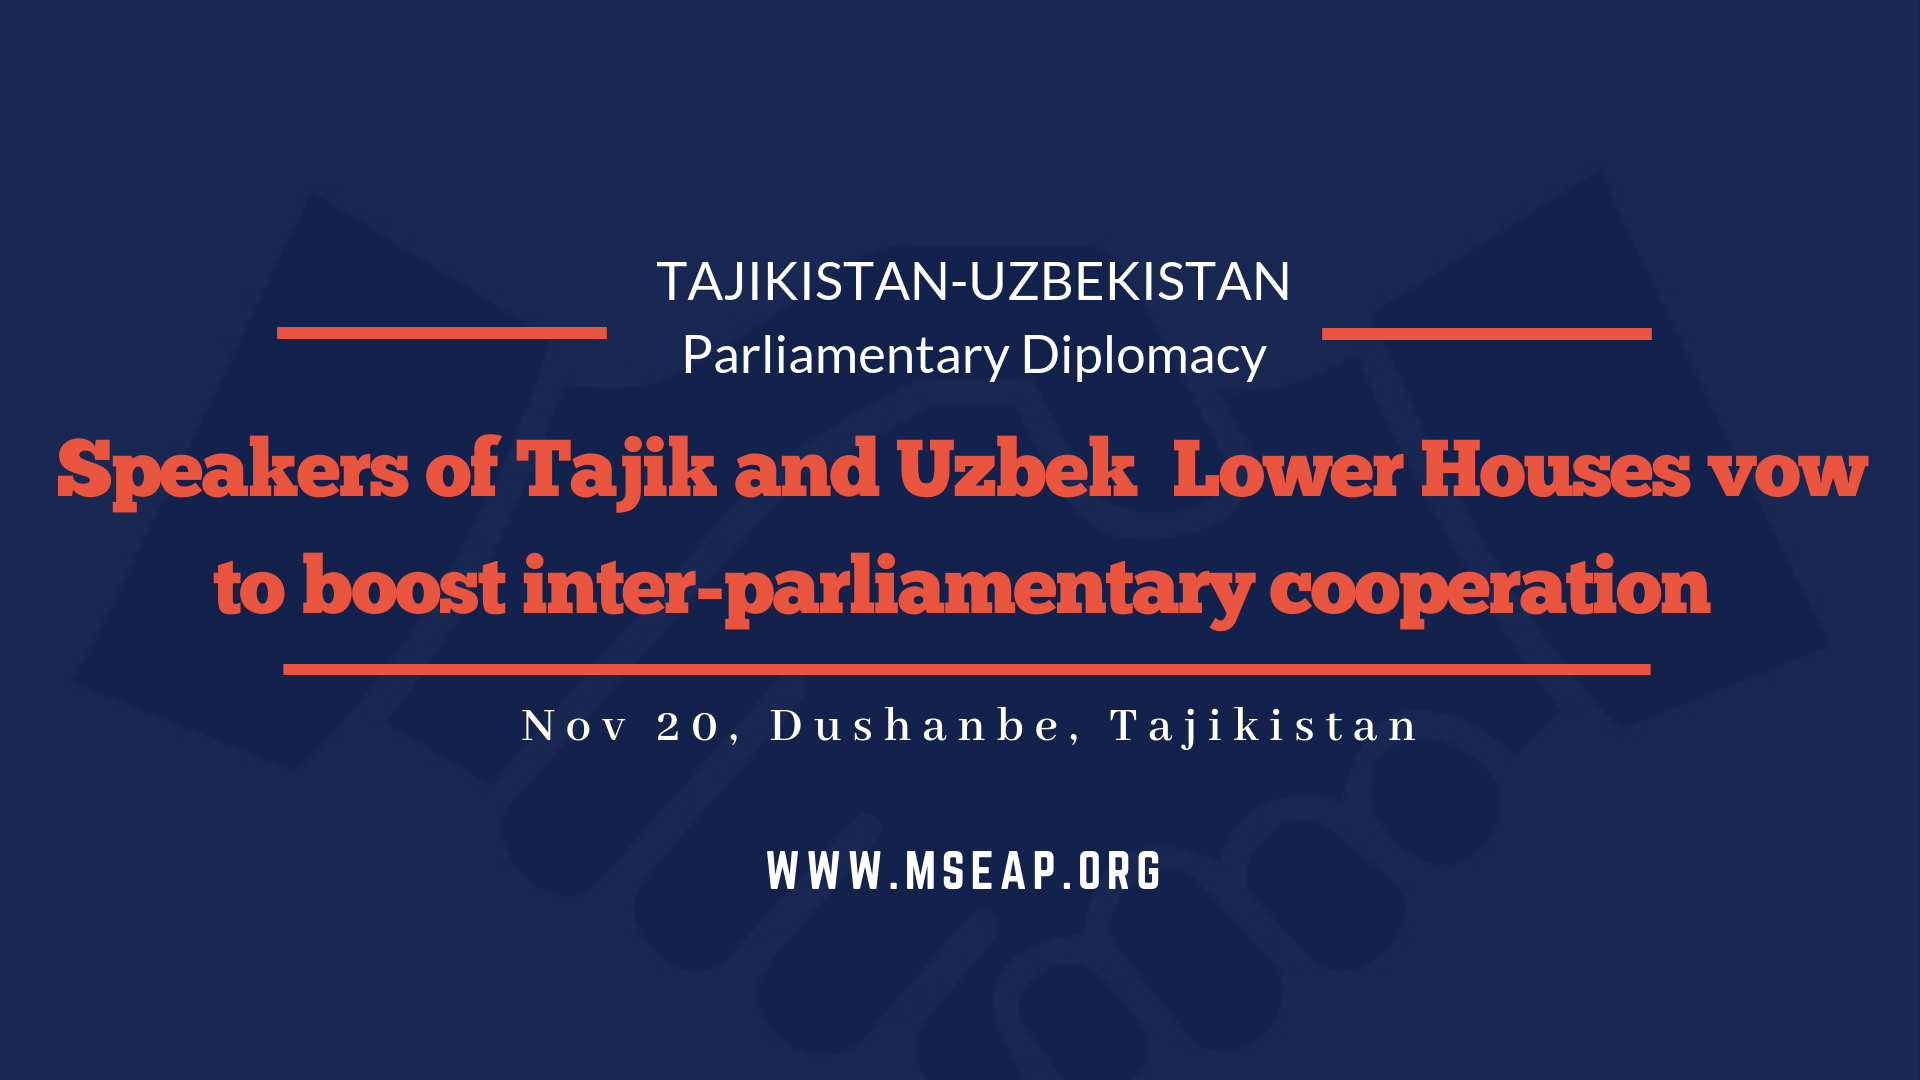 Tajik and Uzbek Speakers of Lower House vow to boost bilateral inter-parliamentary cooperation